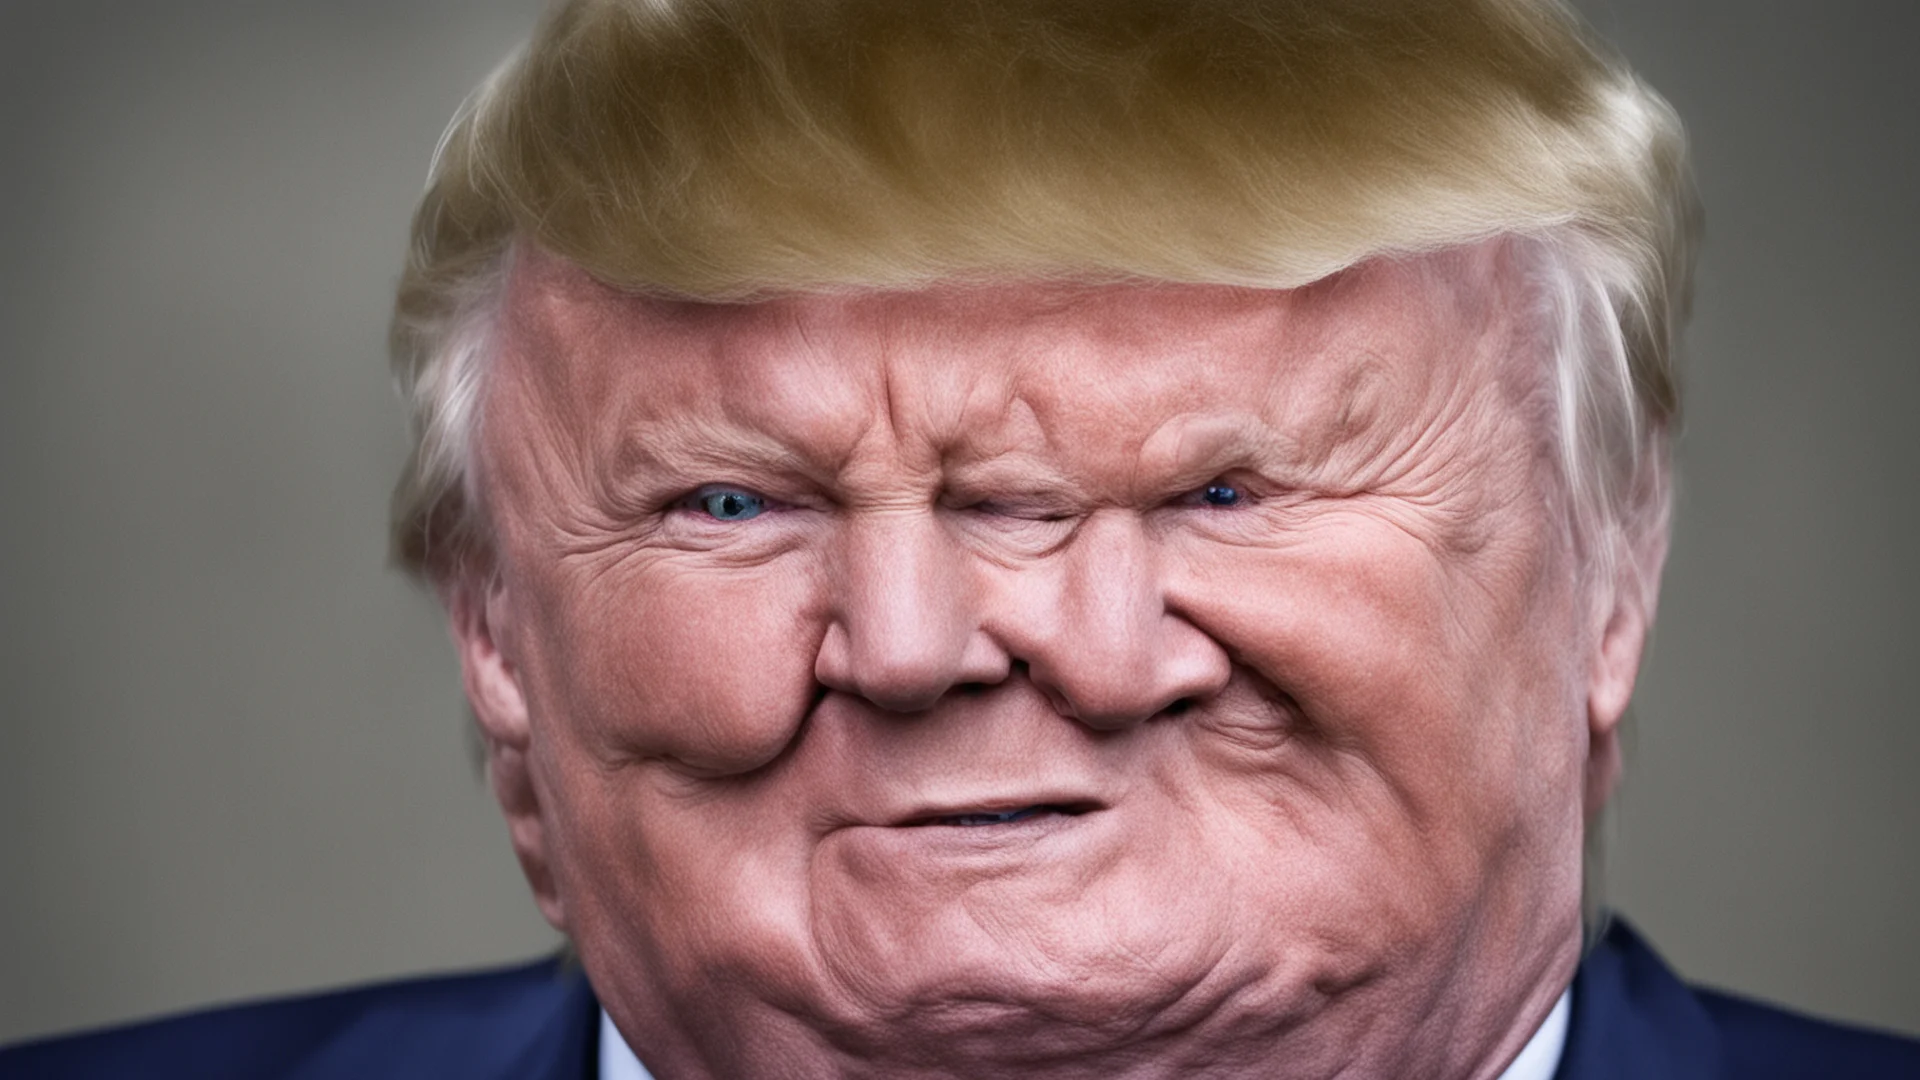 aiamazing trump drvil awesome portrait 2 wide